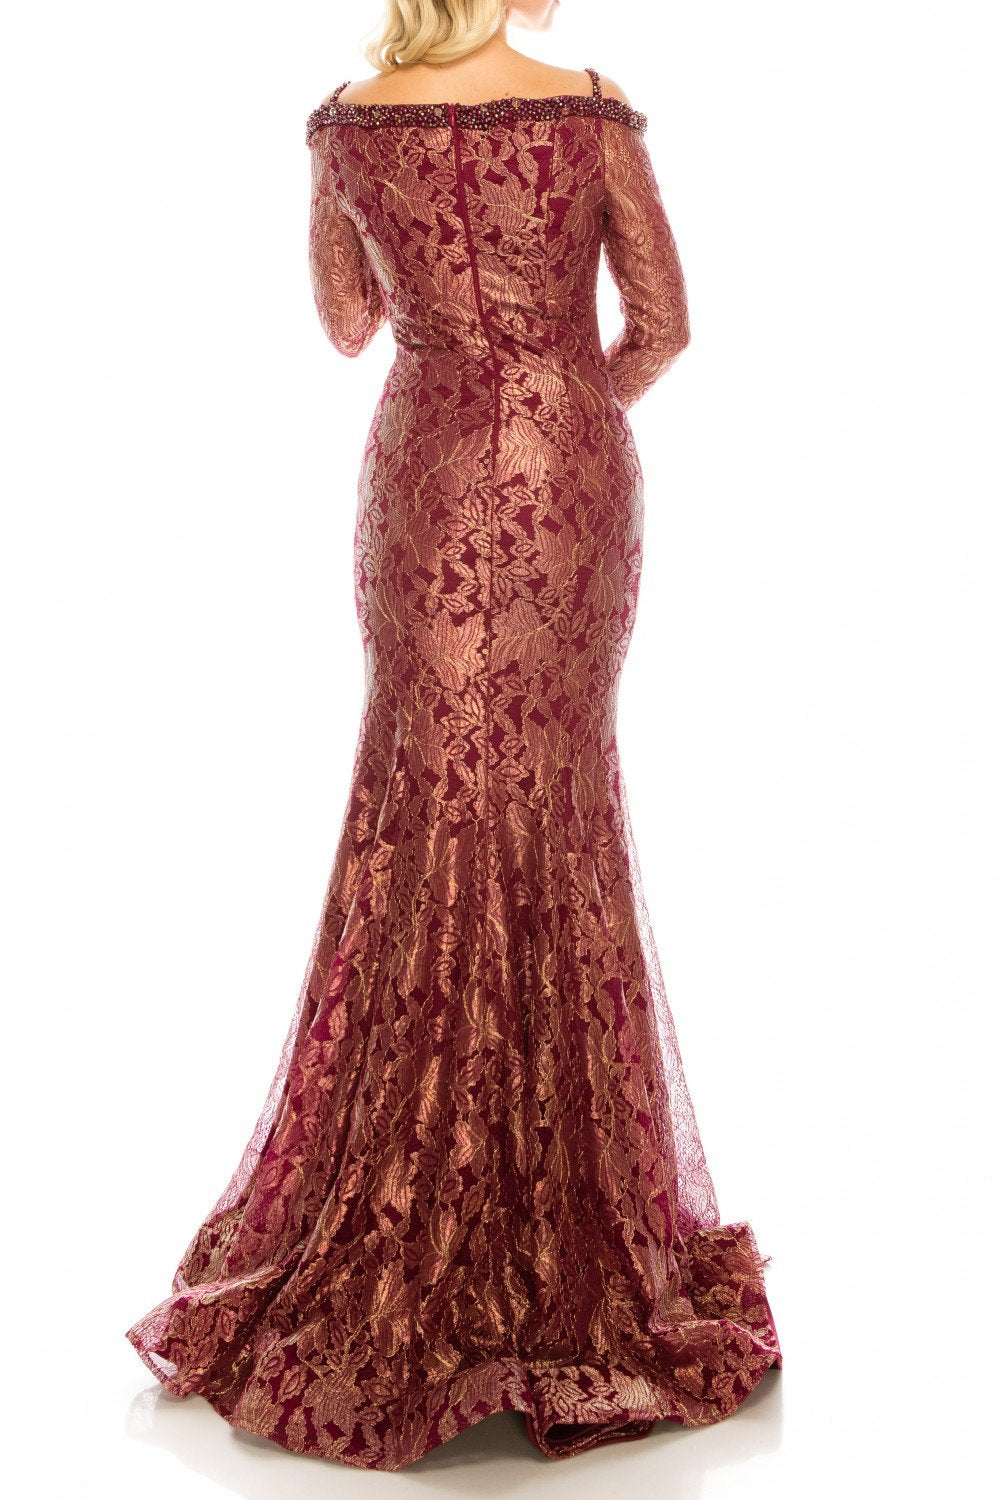 Odrella - 1080 Bejeweled Plunging Off Shoulder Metallic Lace Gown In Red